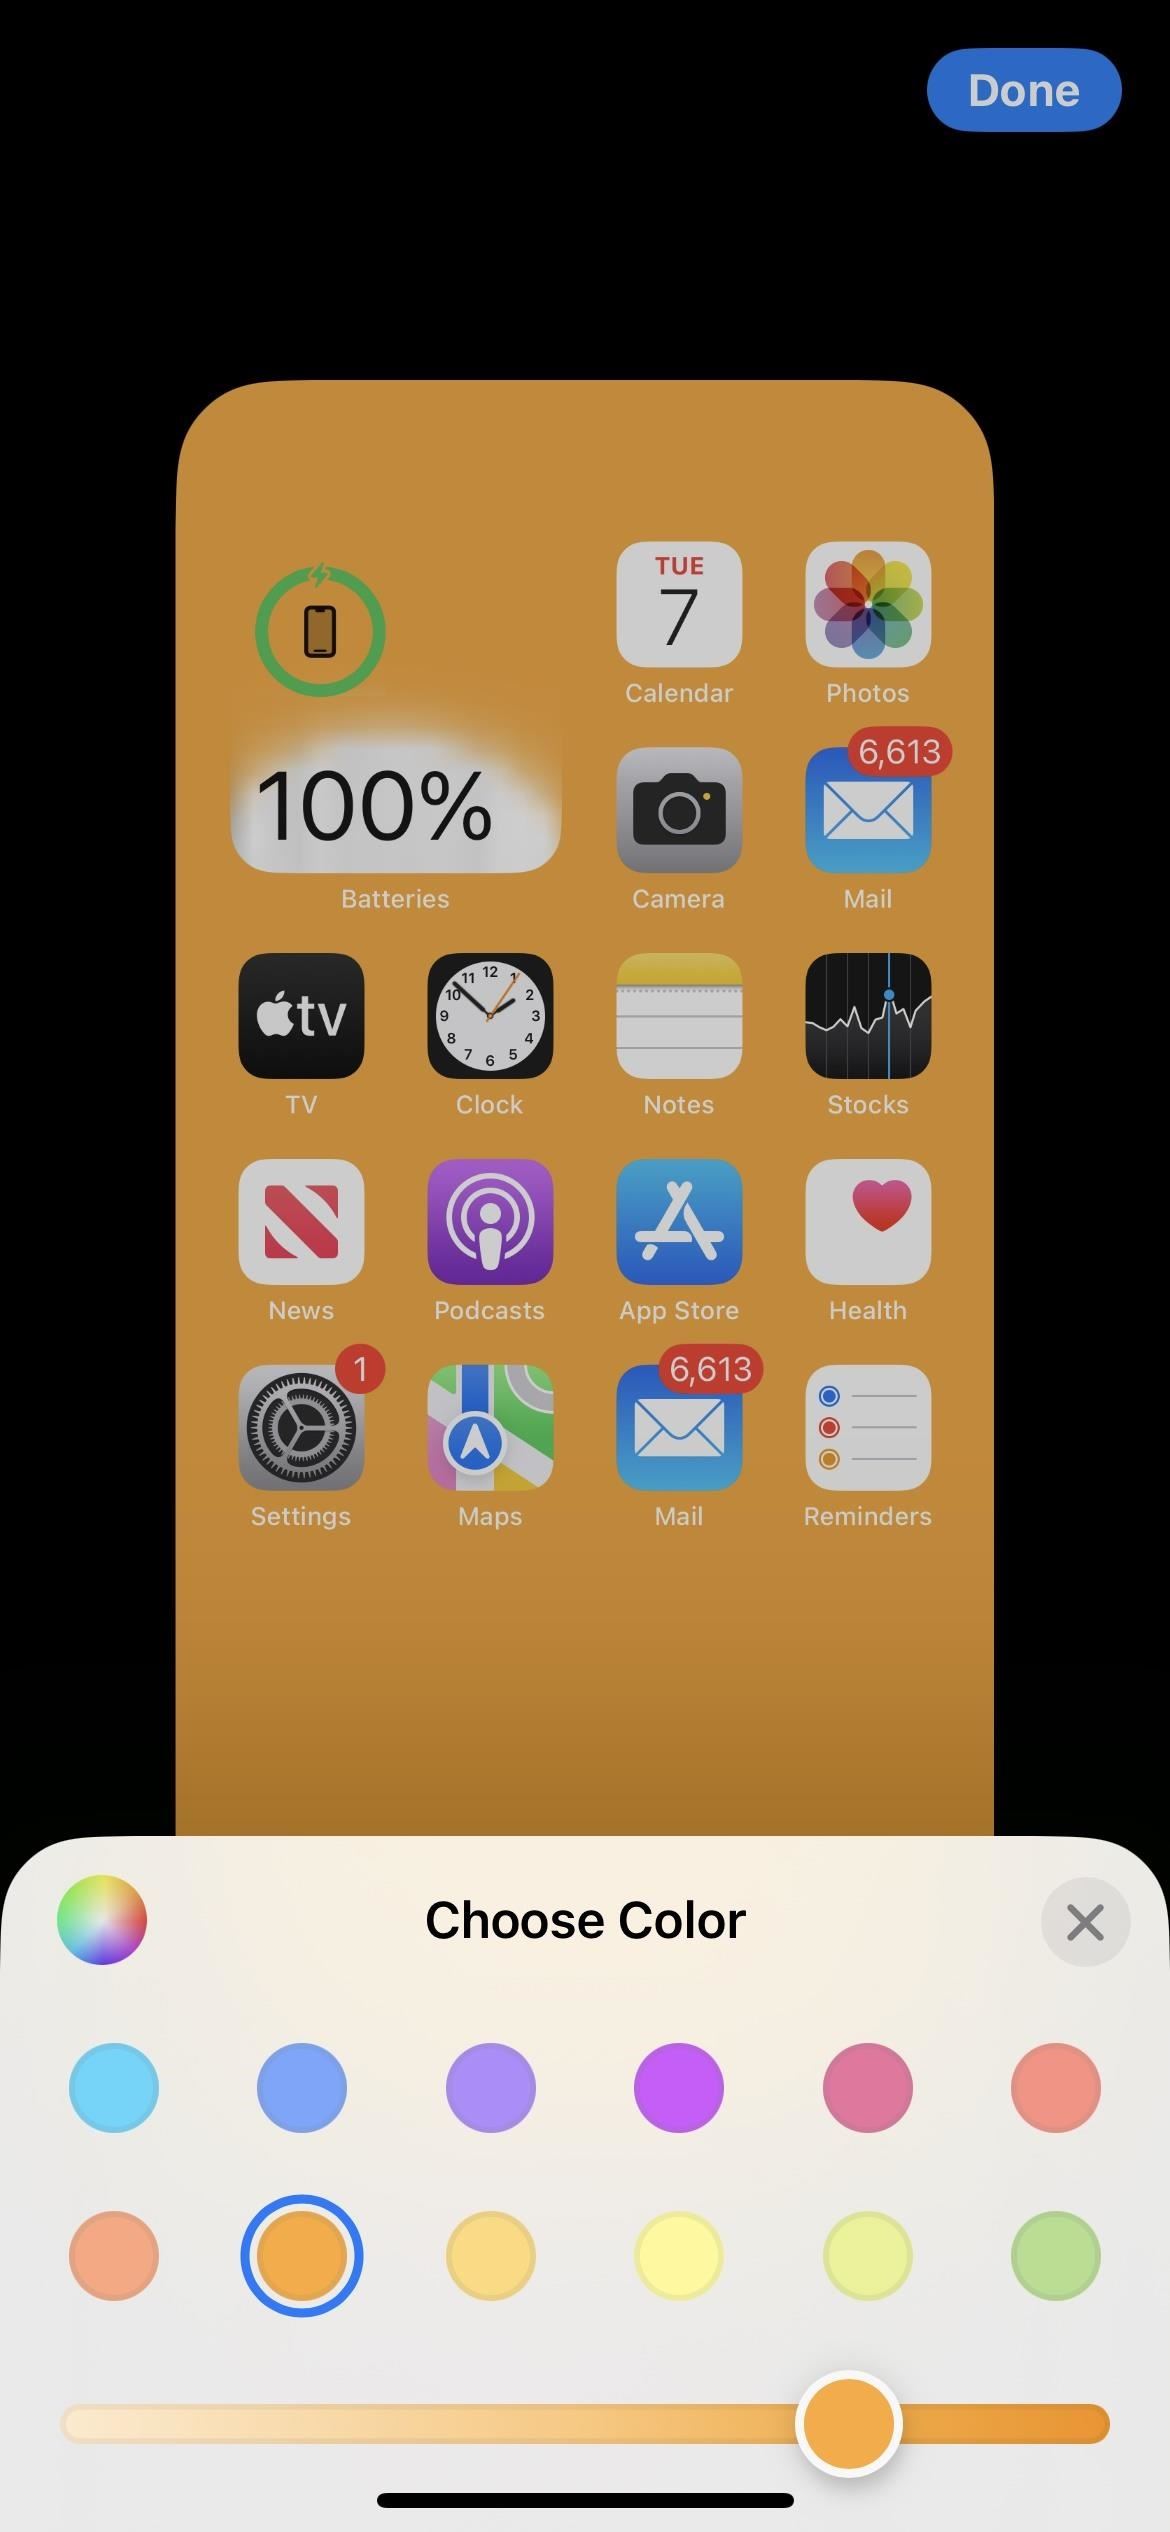 13 Things You Need to Know About Your iPhone's Home Screen in iOS 16